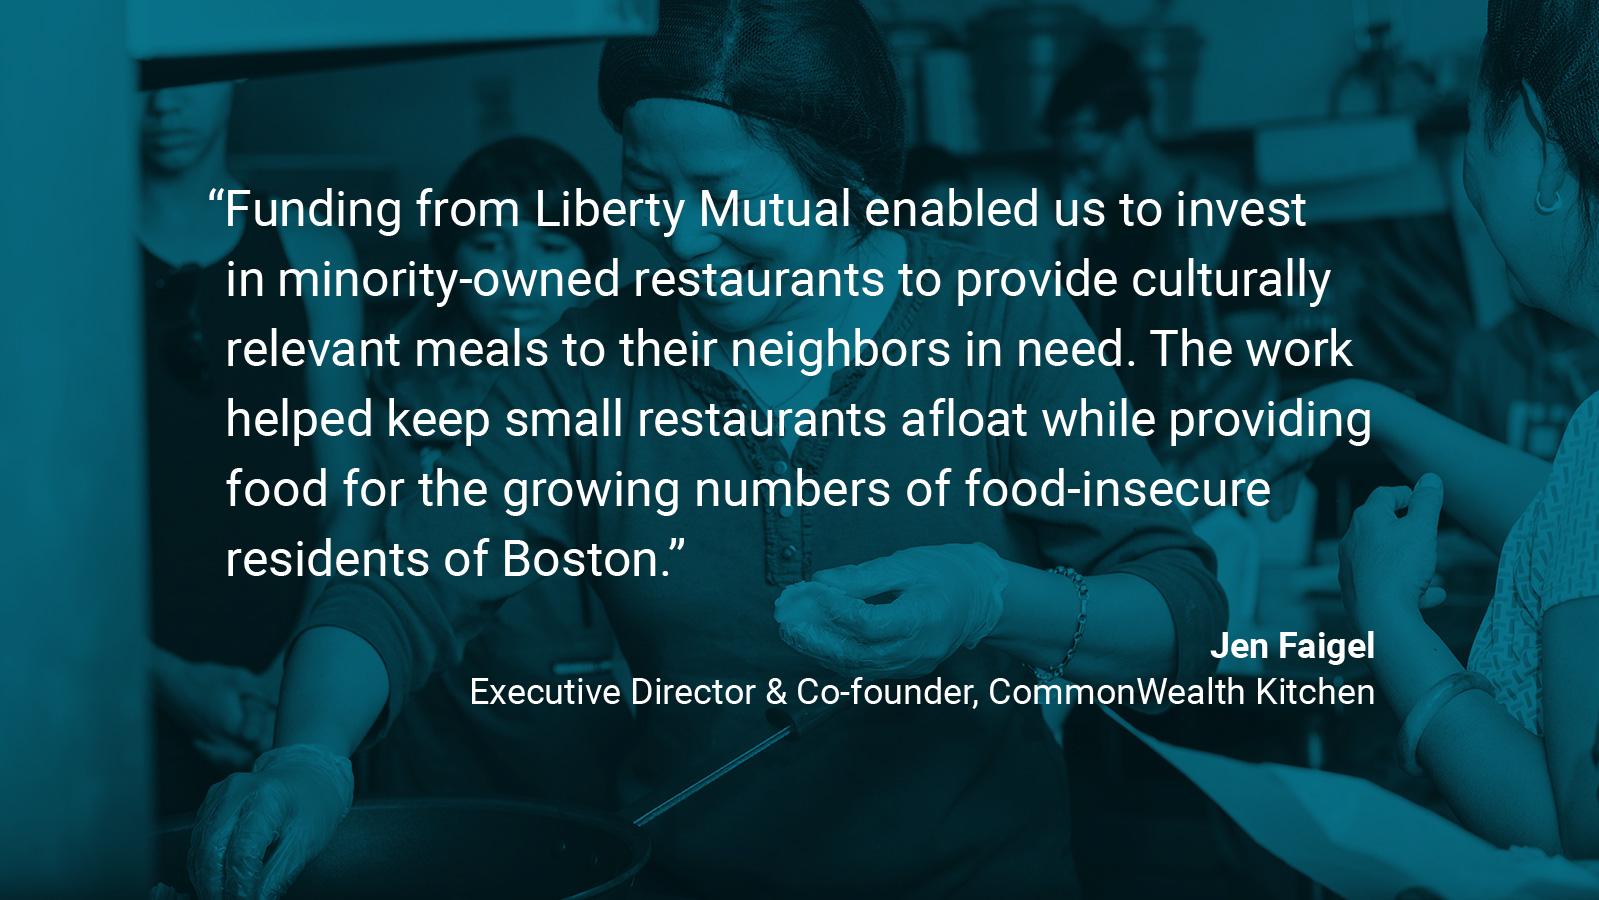 (slide 2 of 4) Quote by: Jen Faigel, Executive Director & Co-founder at Commonwealth Kitchen: “Funding from Liberty Mutual enabled us to invest in minority-owned restaurants to provide culturally relevant meals to their neighbors in need. The work helped keep small restaurants afloat while providing food for the growing numbers of food-insecure residents of Boston.”  . 